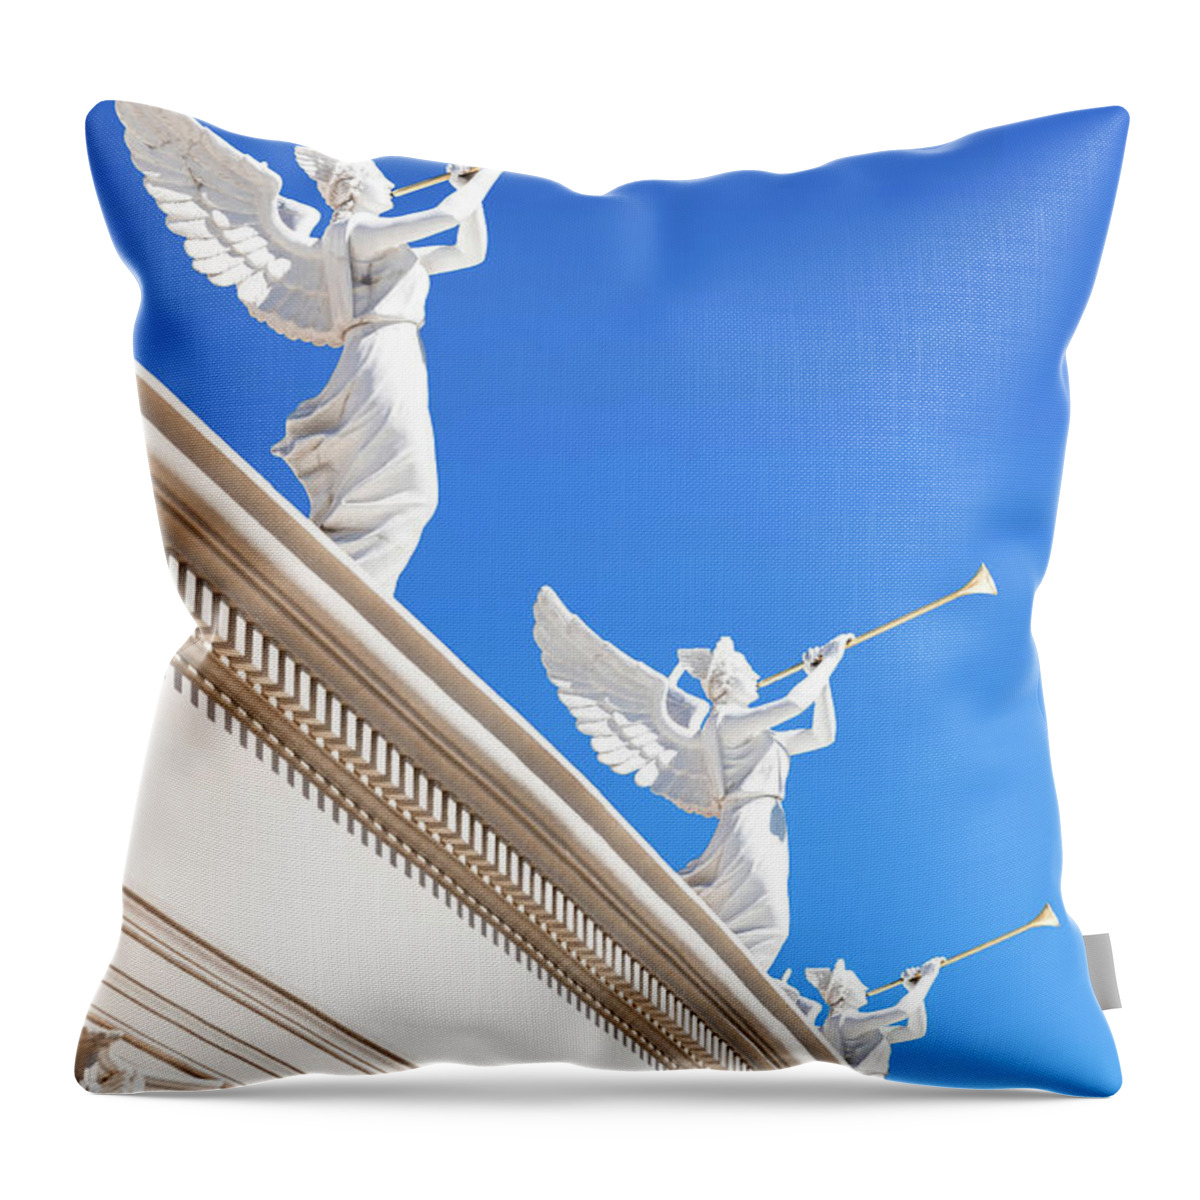 Caesars Palace Throw Pillow featuring the photograph Caesars Palace Trumpet Statues by Aloha Art